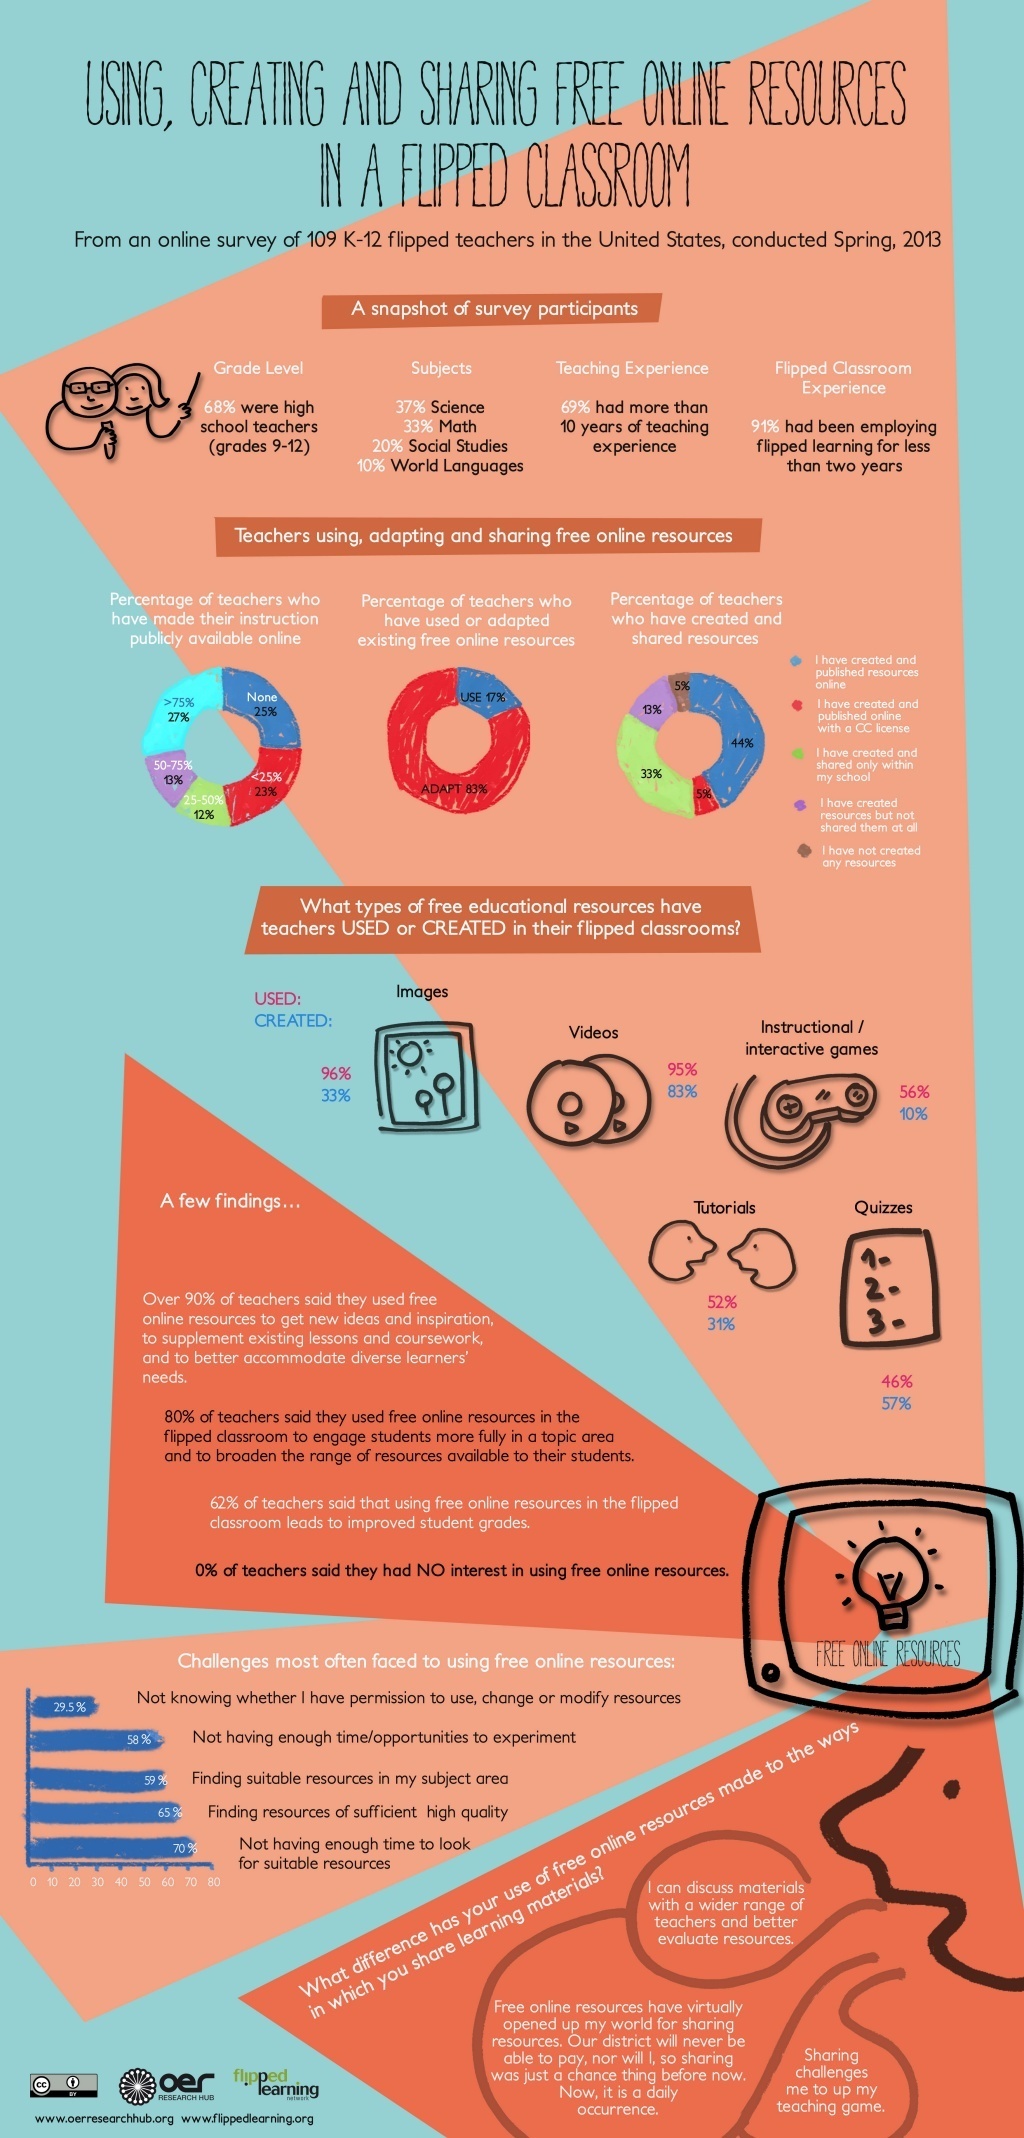 How To Use Free Online Resources In A Flipped Classroom Infographic